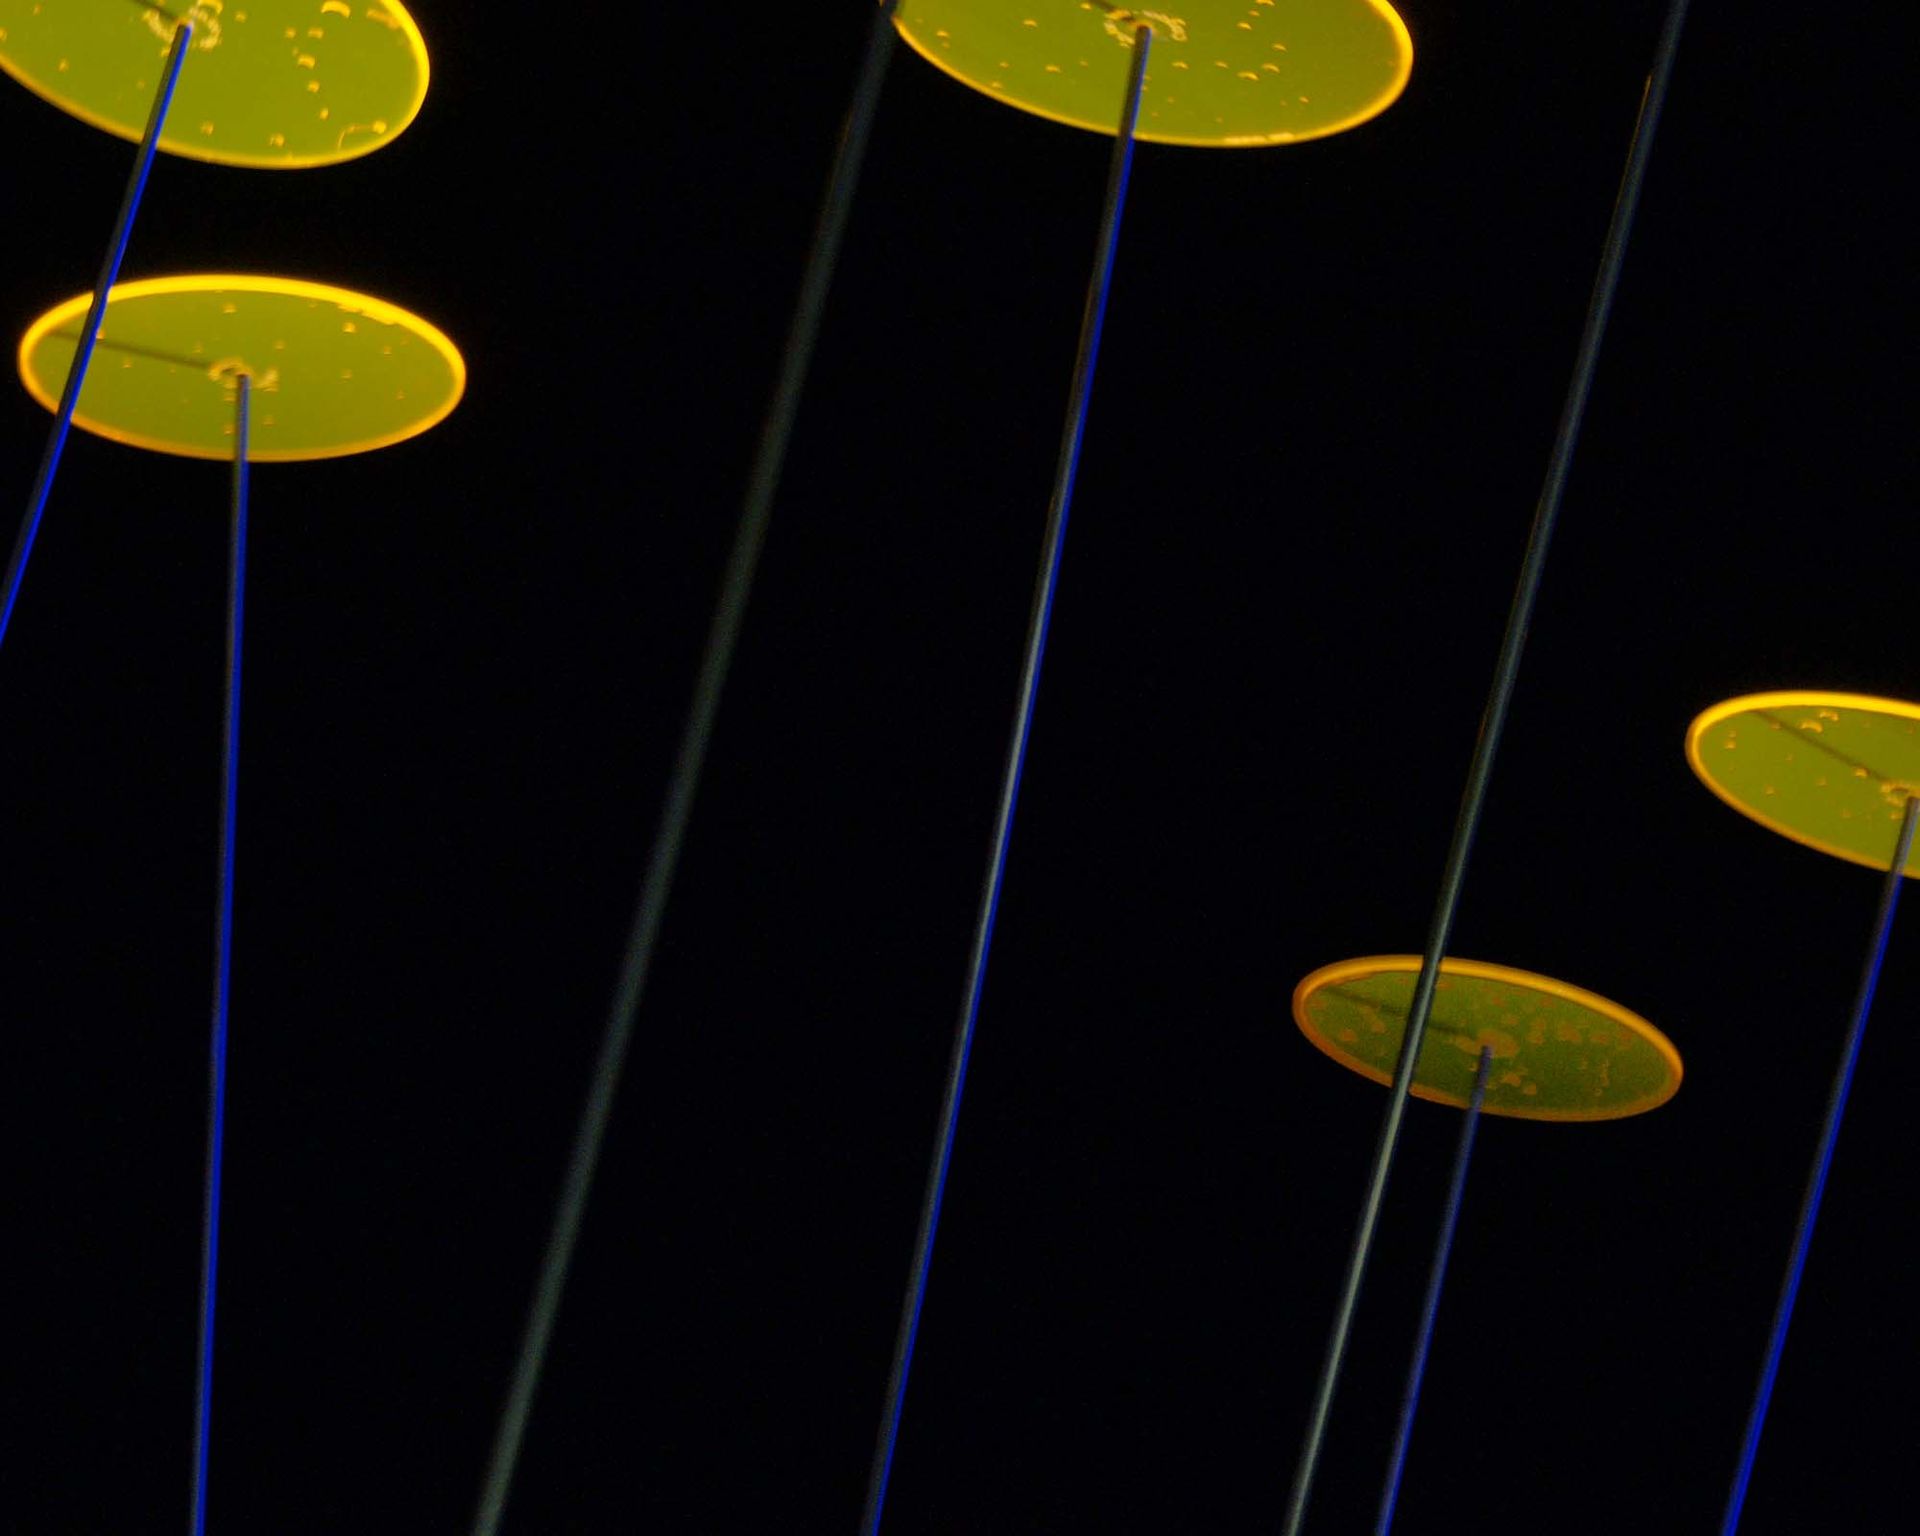 yellow discs on high bars at night